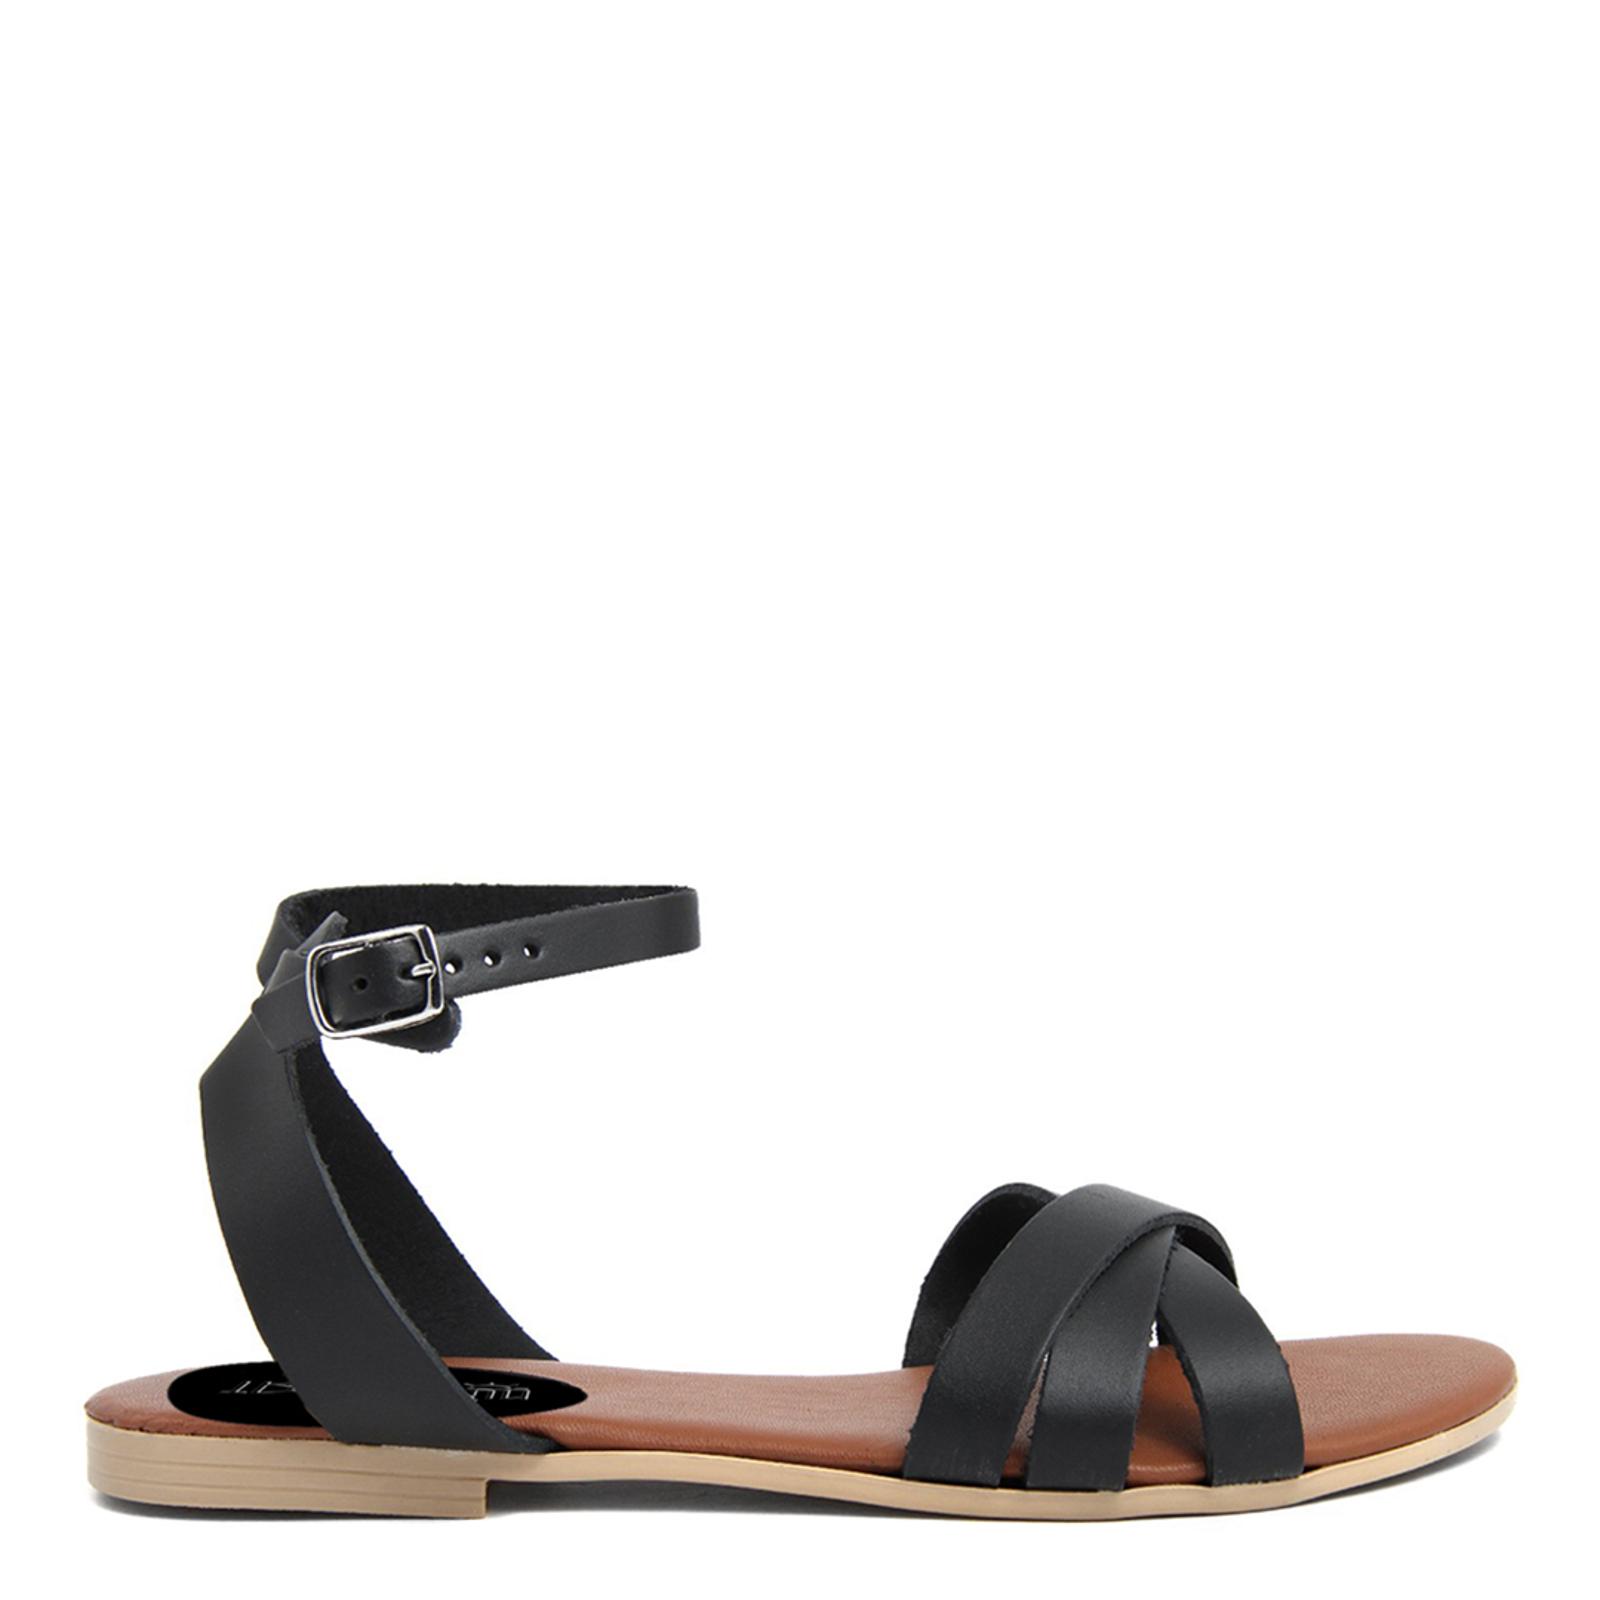 Black Leather Strappy Flat Sandals - BrandAlley